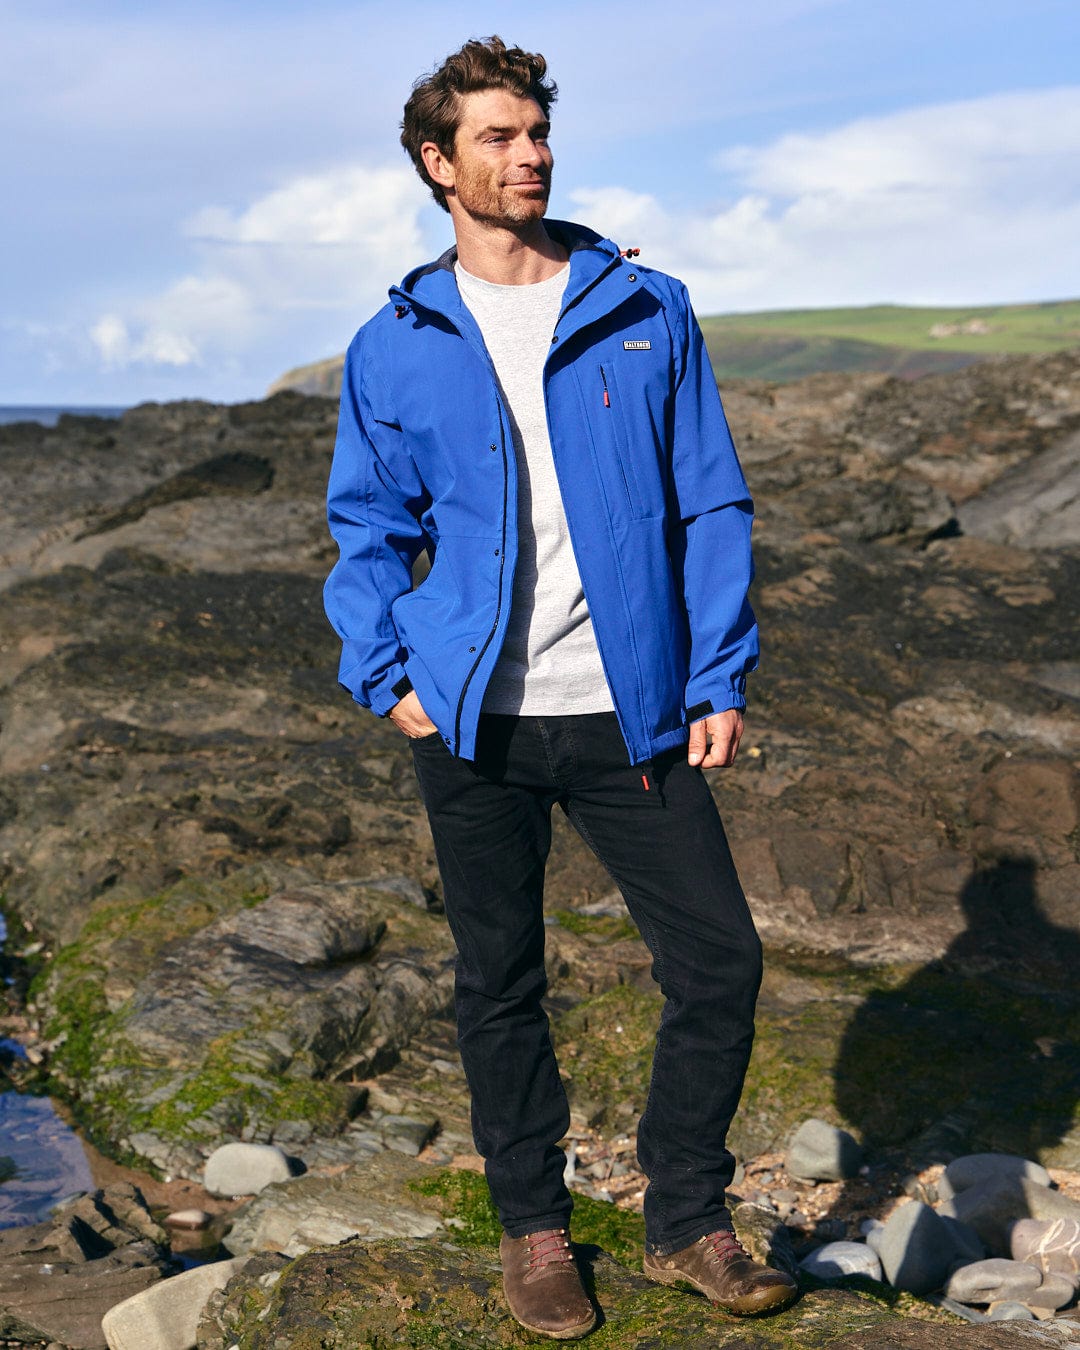 A man in a Saltrock Whistler - Mens Hooded Jacket - Blue, waterproof and standing on a rocky beach.